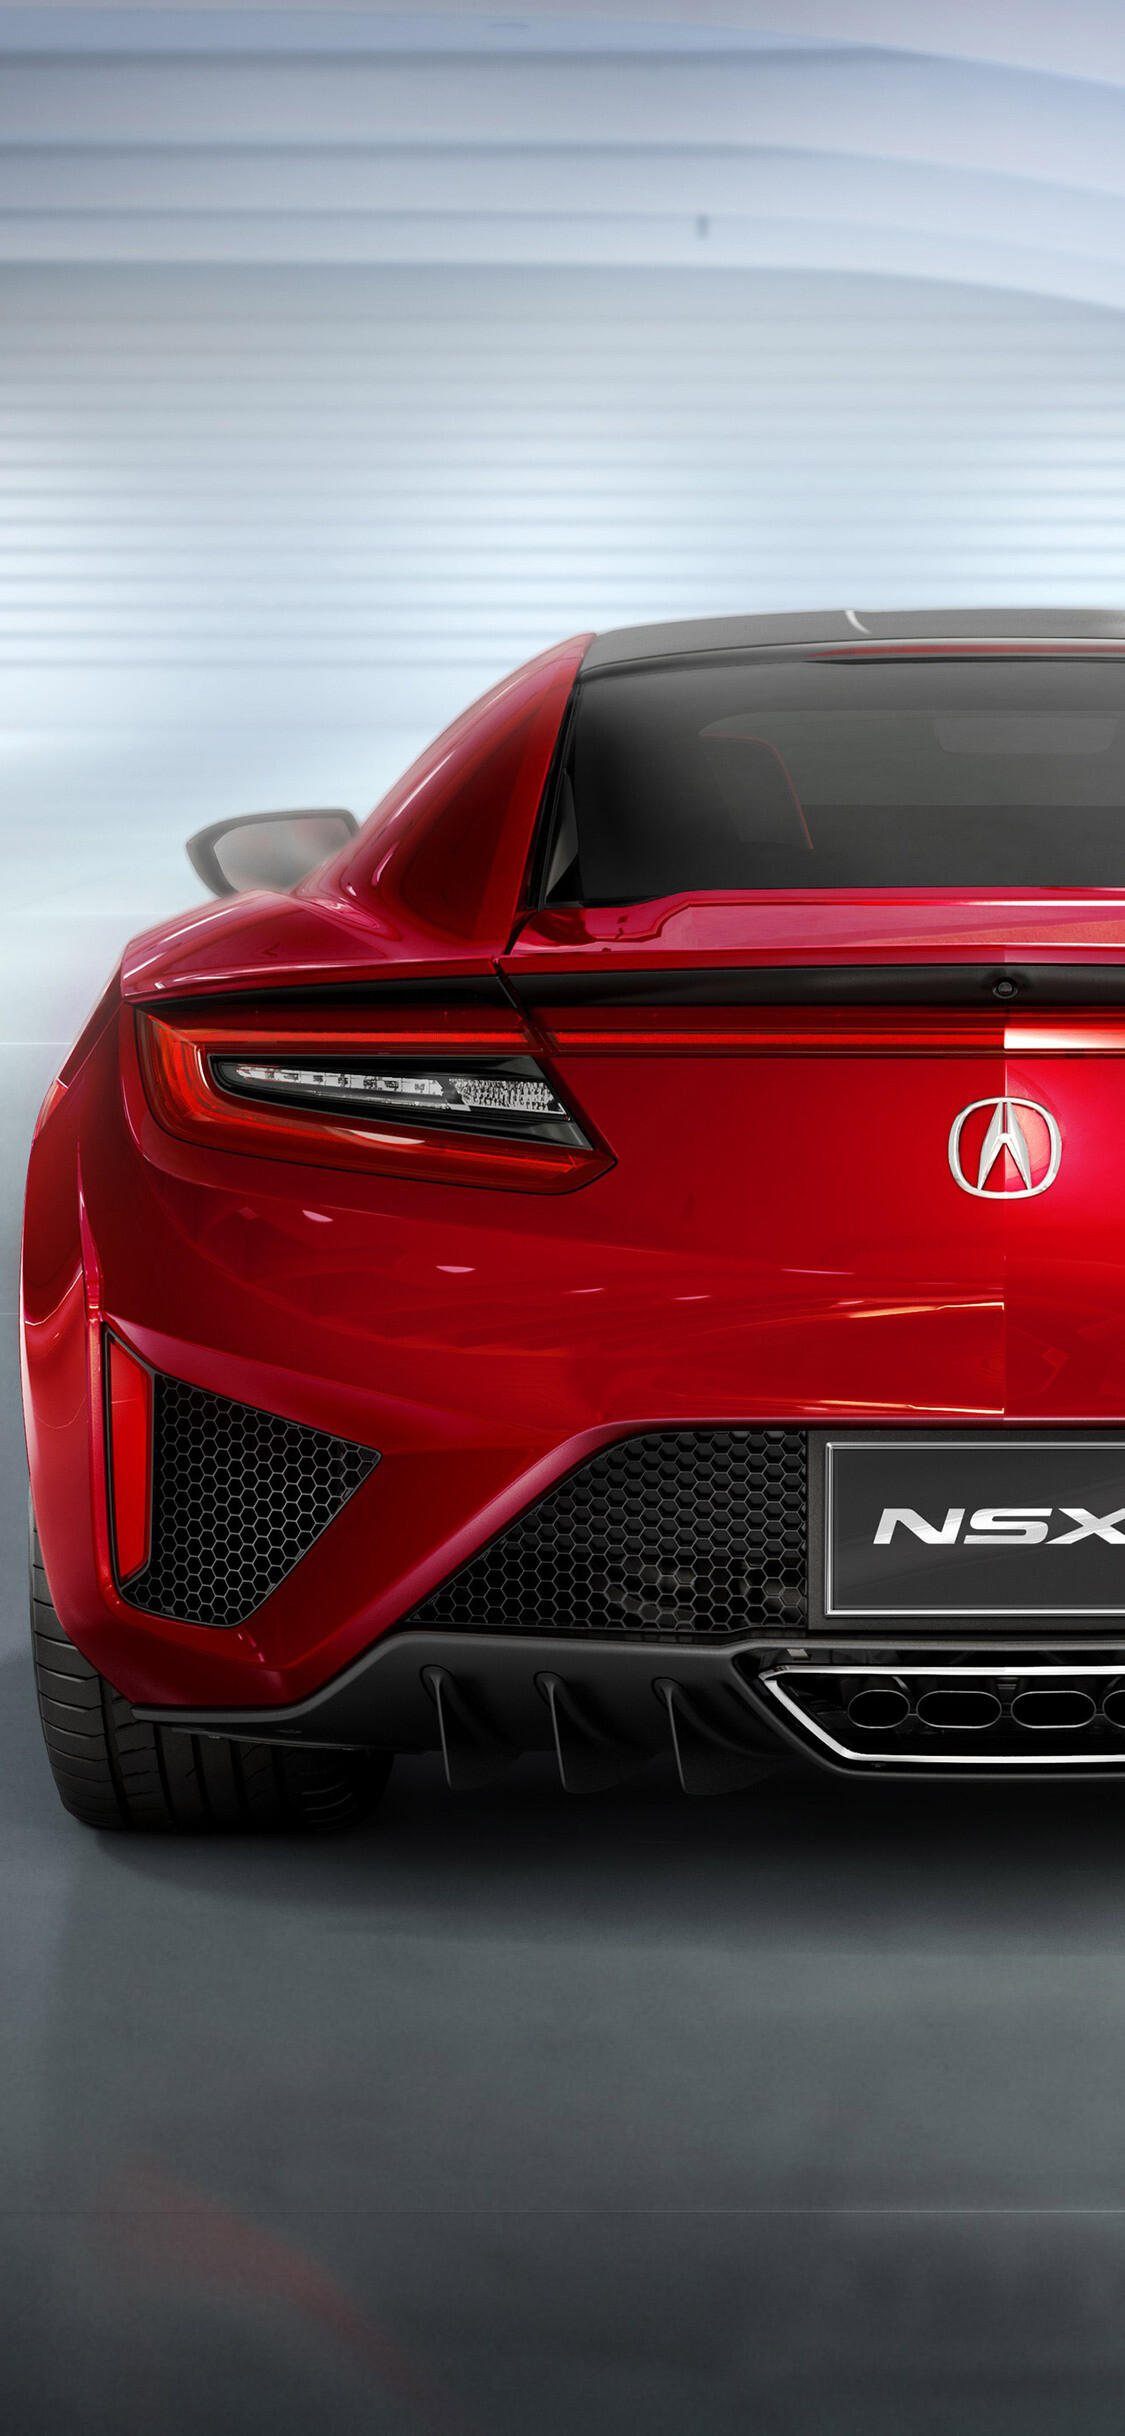 Acura NSX, 2017 edition, 4K iPhone wallpapers, Stunning images, 1130x2440 HD Phone